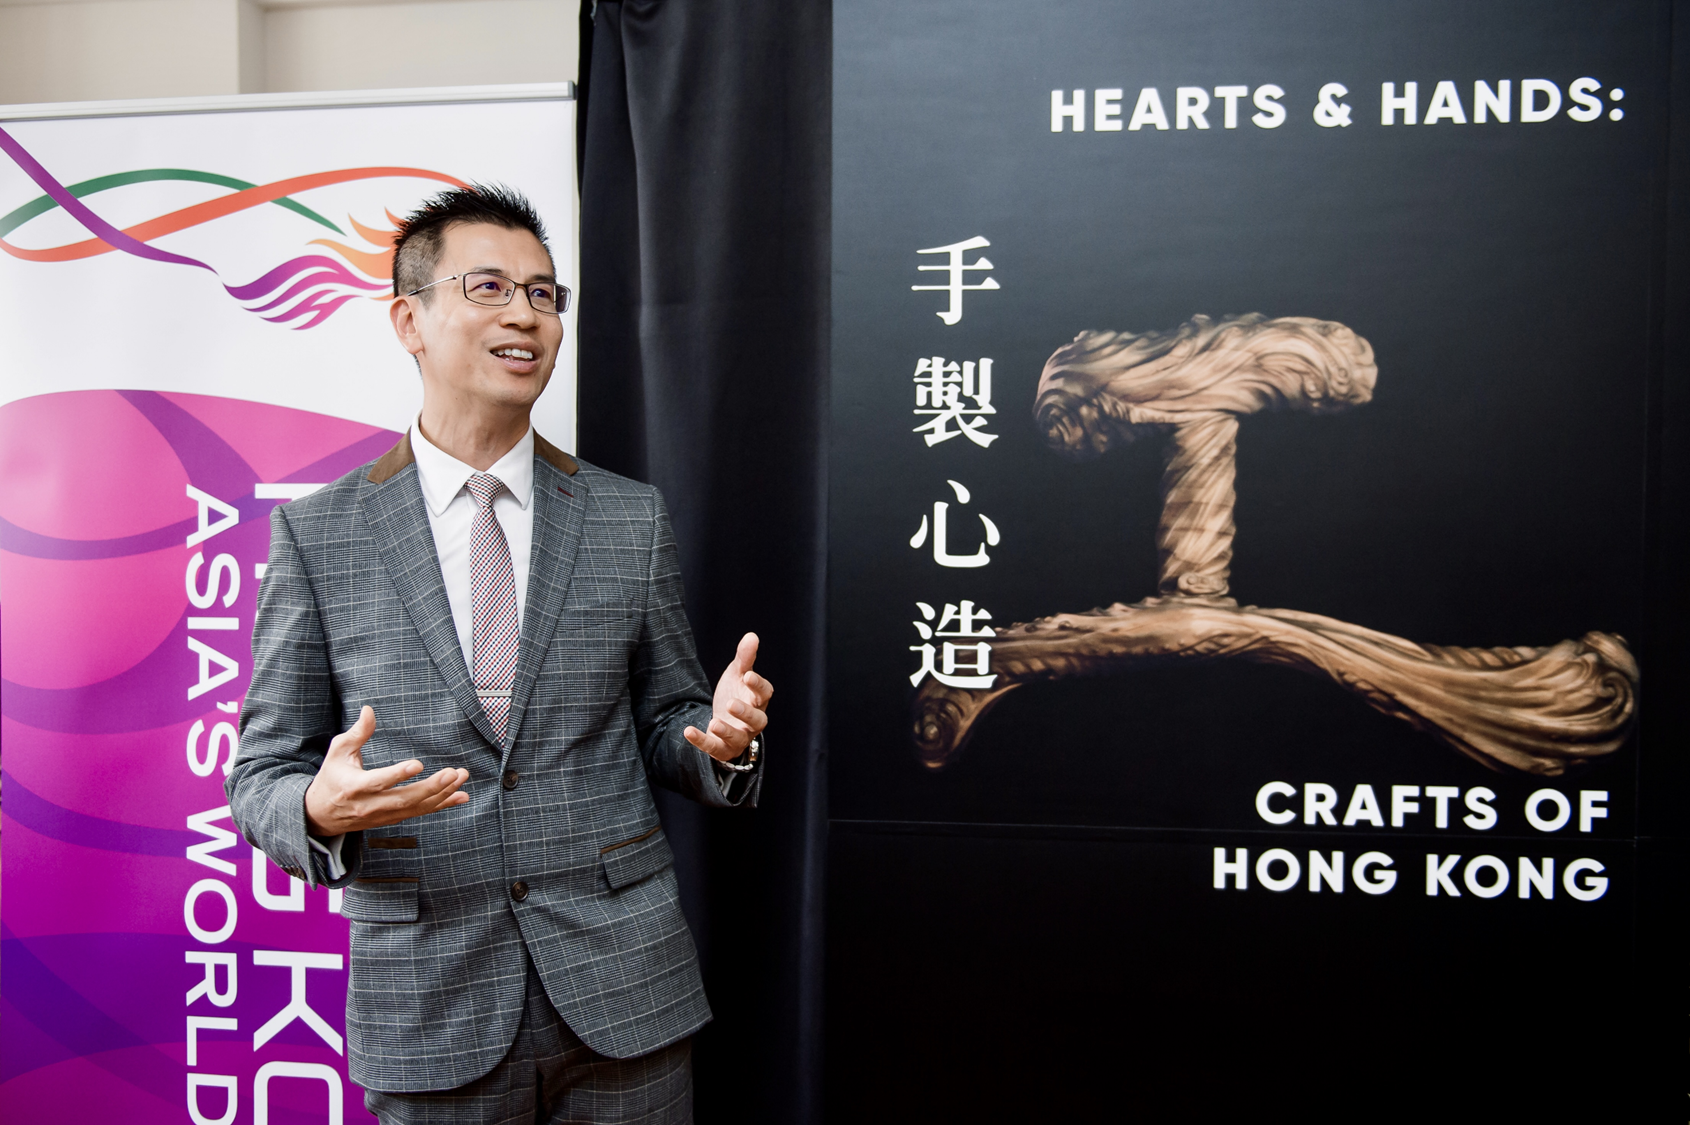 The Hong Kong Economic and Trade Office, London (London ETO), supported Crafts on Peel, a charitable organisation in Hong Kong, to join the London Craft Week 2023, bringing the "Hearts & Hands: Crafts of Hong Kong" exhibition to London. Photo shows the Director-General of London ETO, Mr Gilford Law, speaking at a reception of the exhibition on May 9 (London time).
